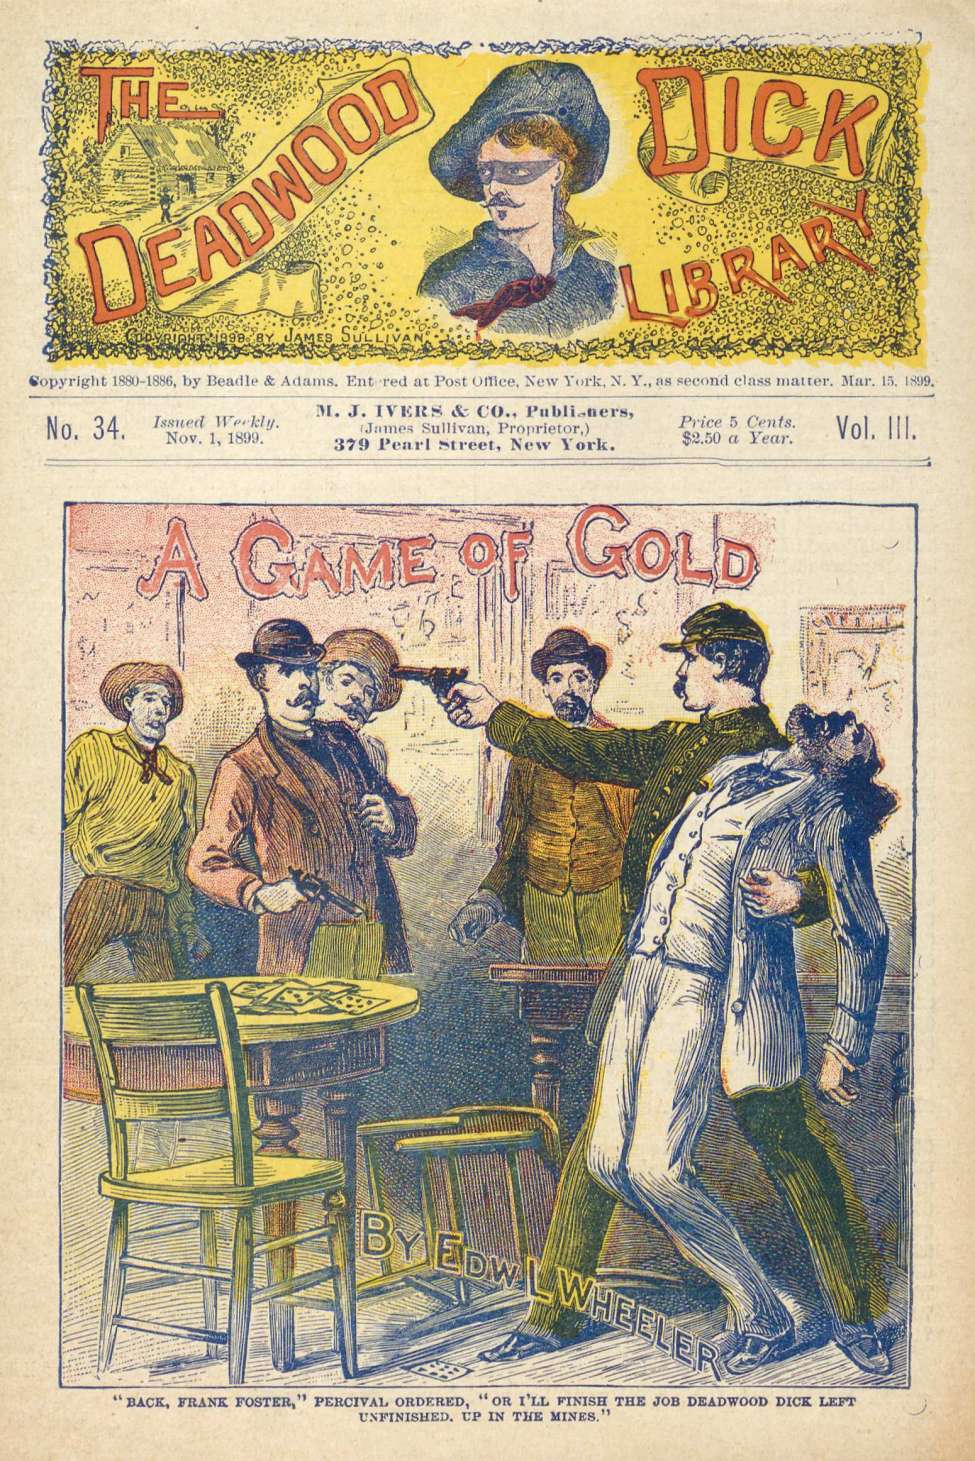 Book Cover For Deadwood Dick Library v2 34 - A Game of Gold